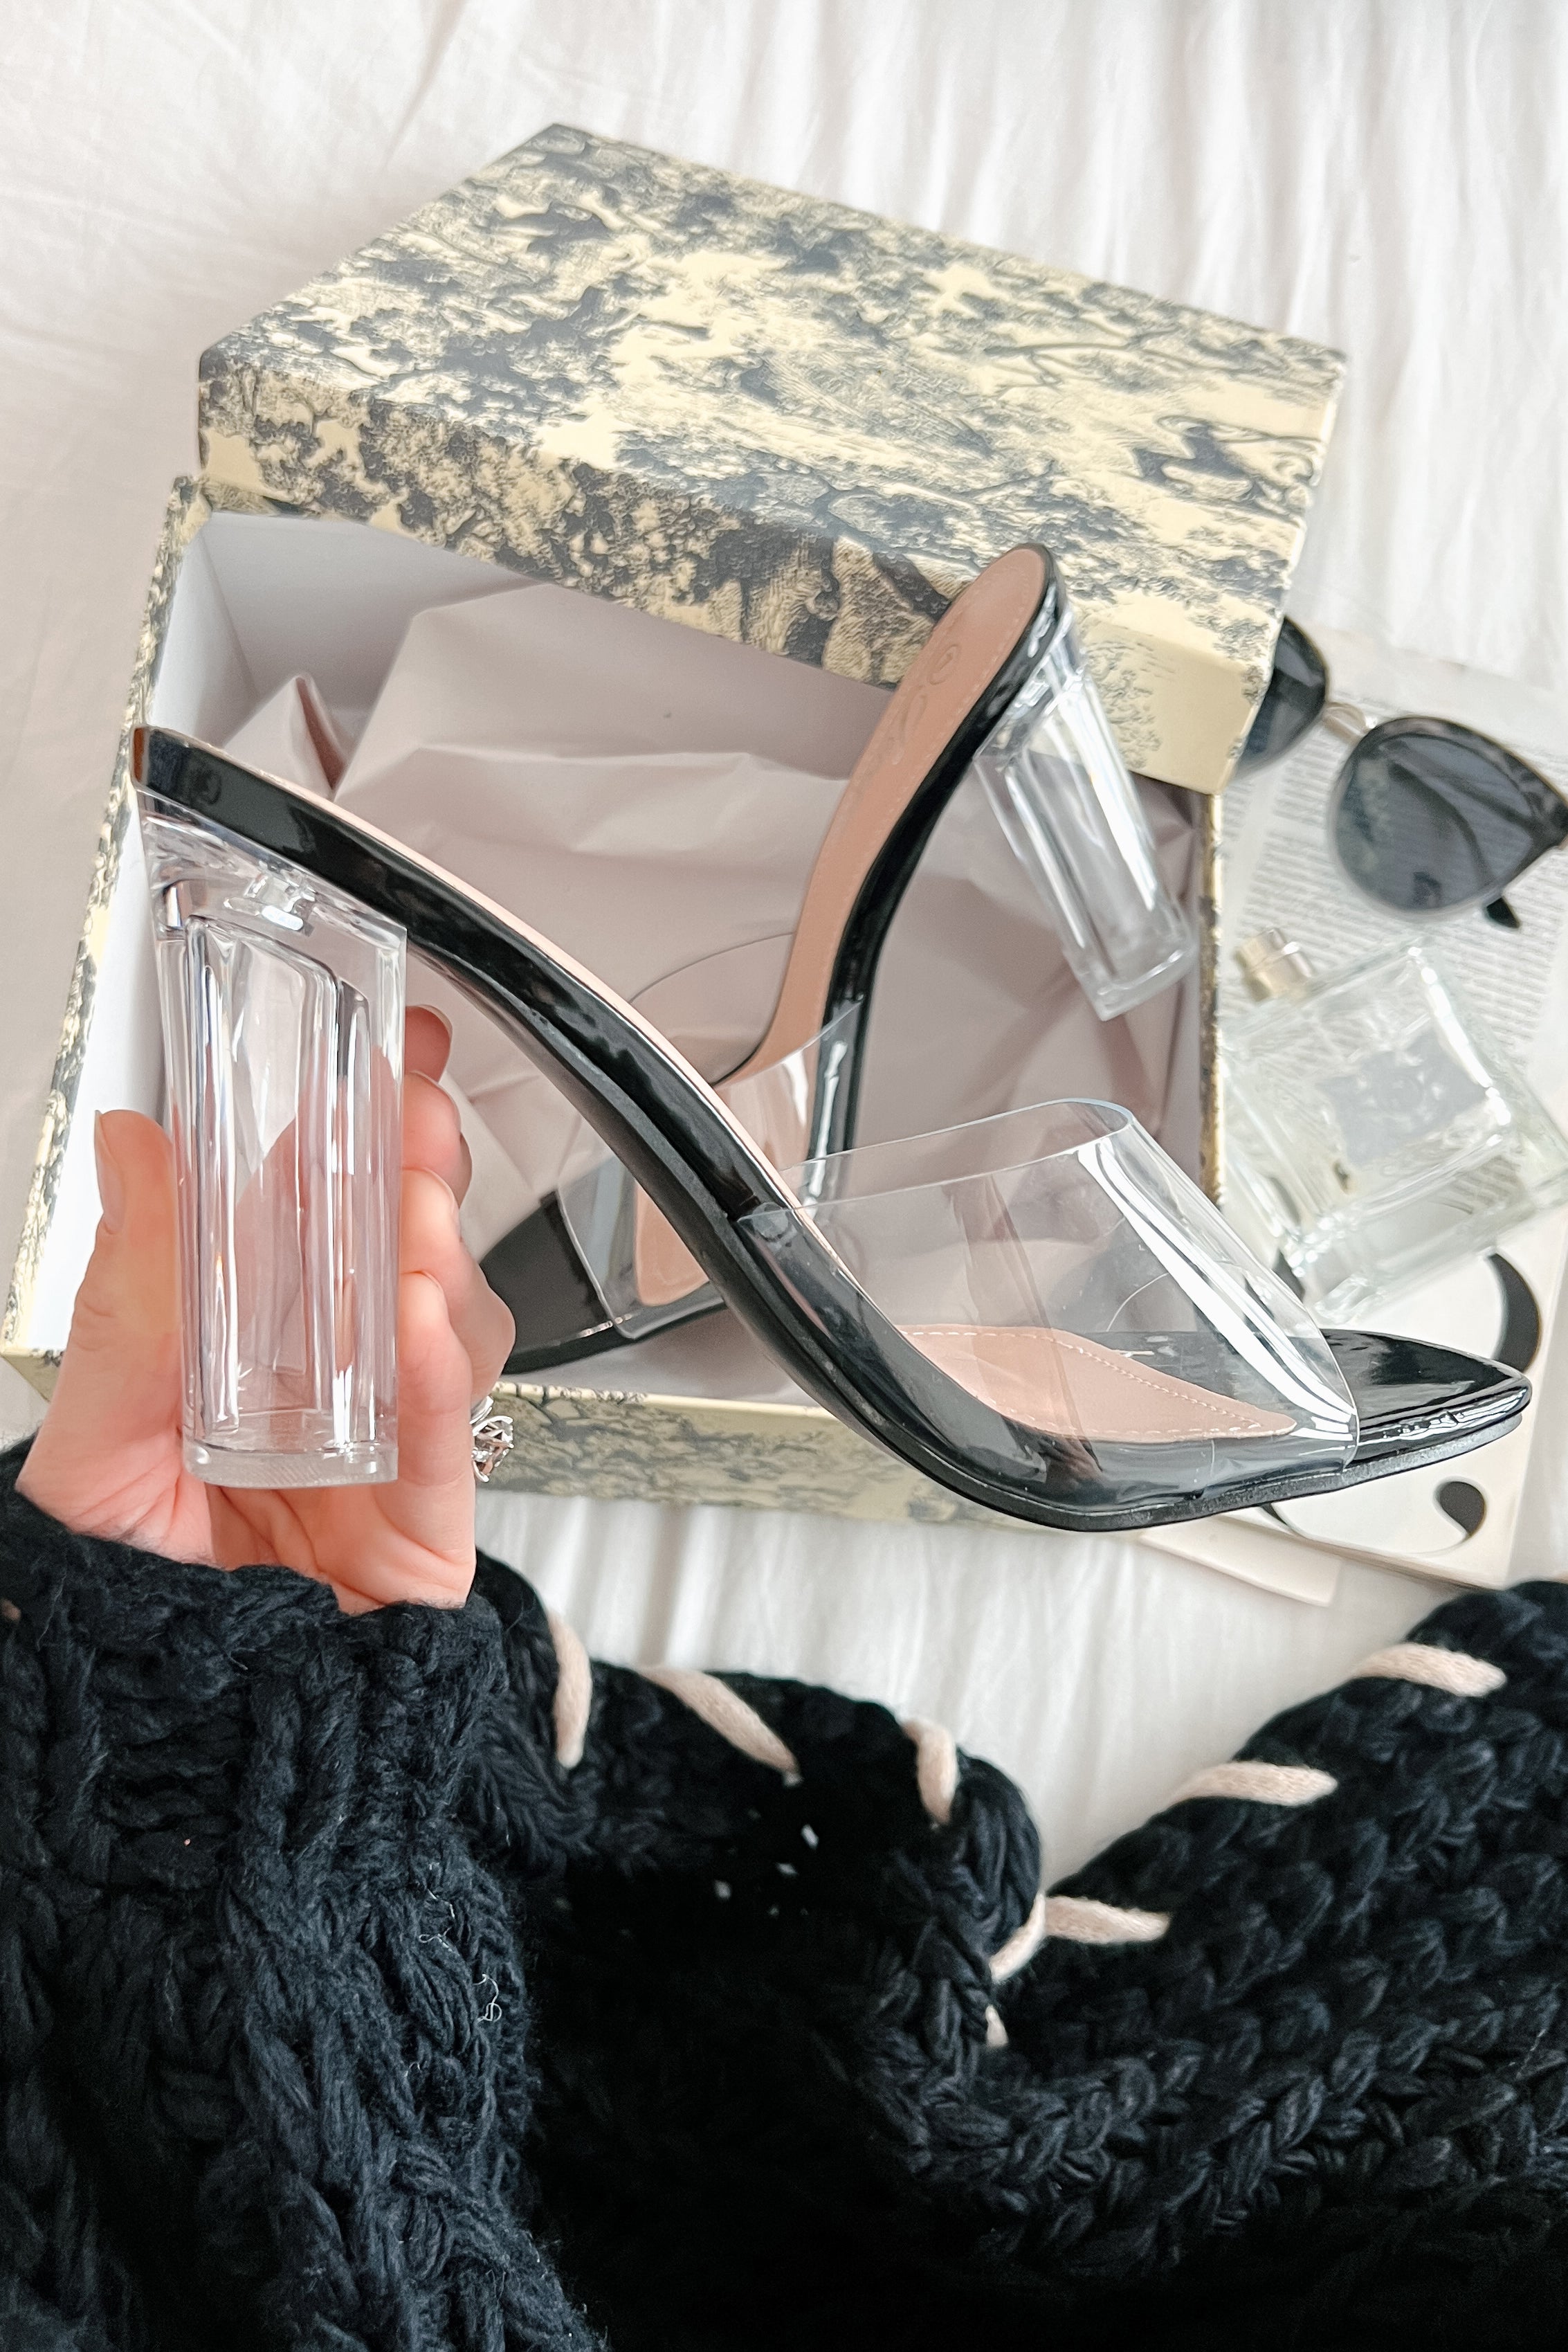 Ladies Girls Transparent High Heel Clear Strap Slides Sandal - China Daily  Wear and Leisure Sandal price | Made-in-China.com